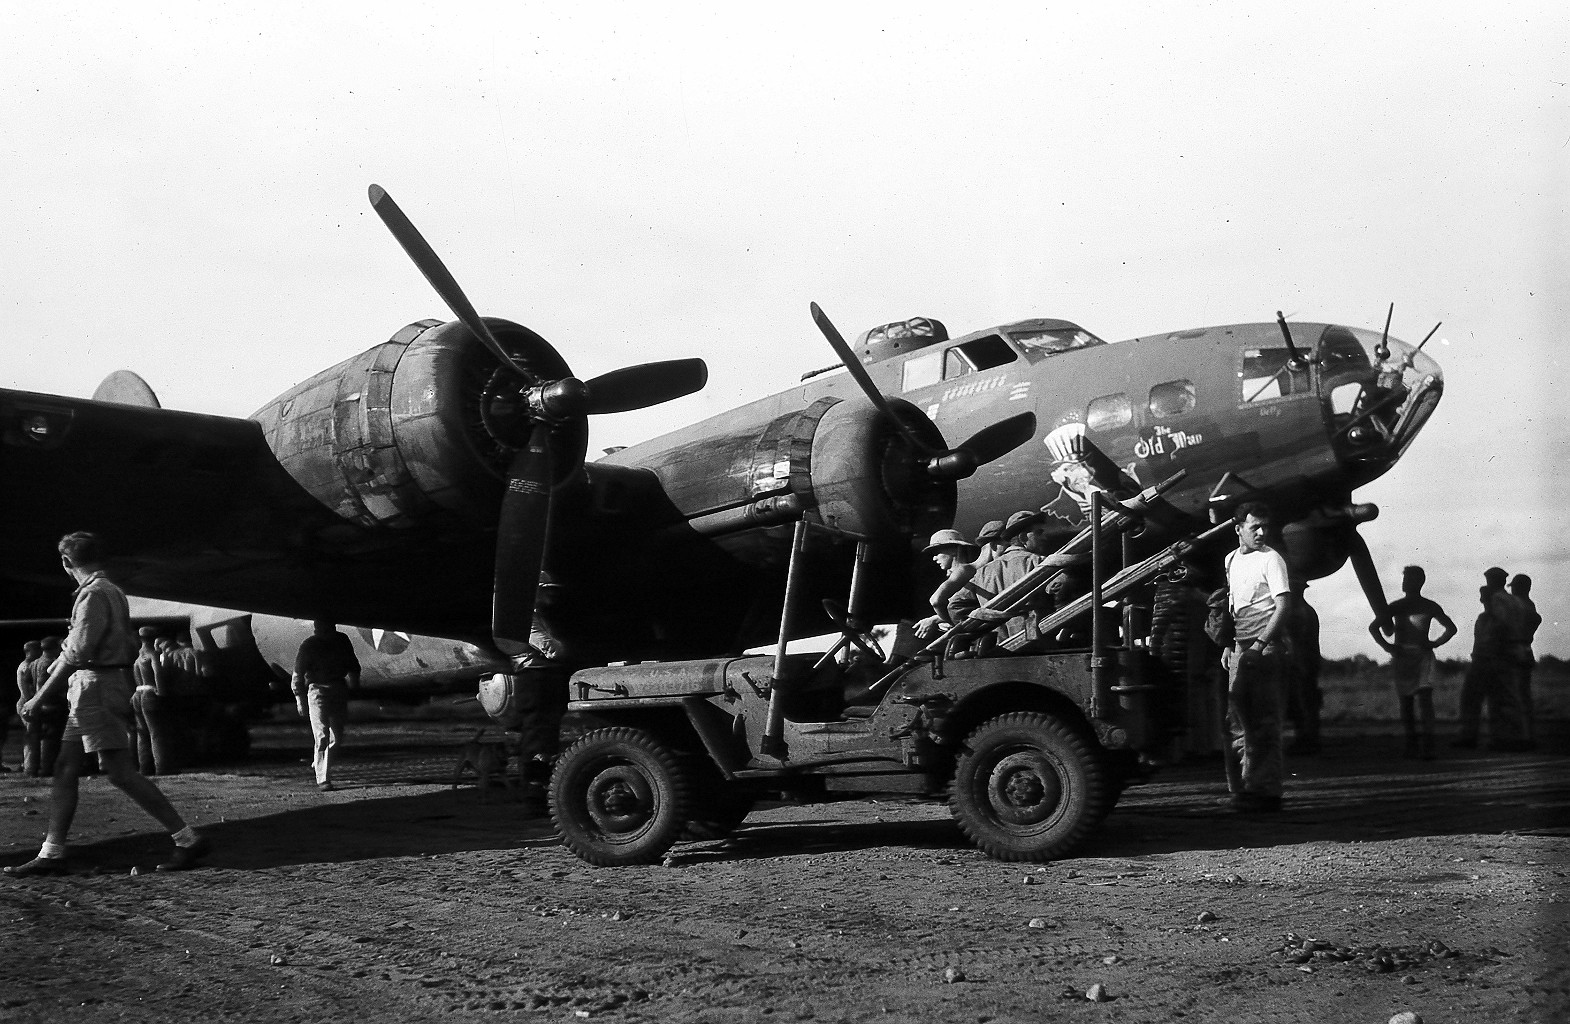 A Jeep brought litters to the B-17F Fortress “The Old Man” of the 65th Bomb Squadron shortly after landing at Dobodura, New Guinea, Mar 8 1943. The B-17 was attacked by 13 Japanese fighters during a photo-recon mission over Gasmata, New Britain